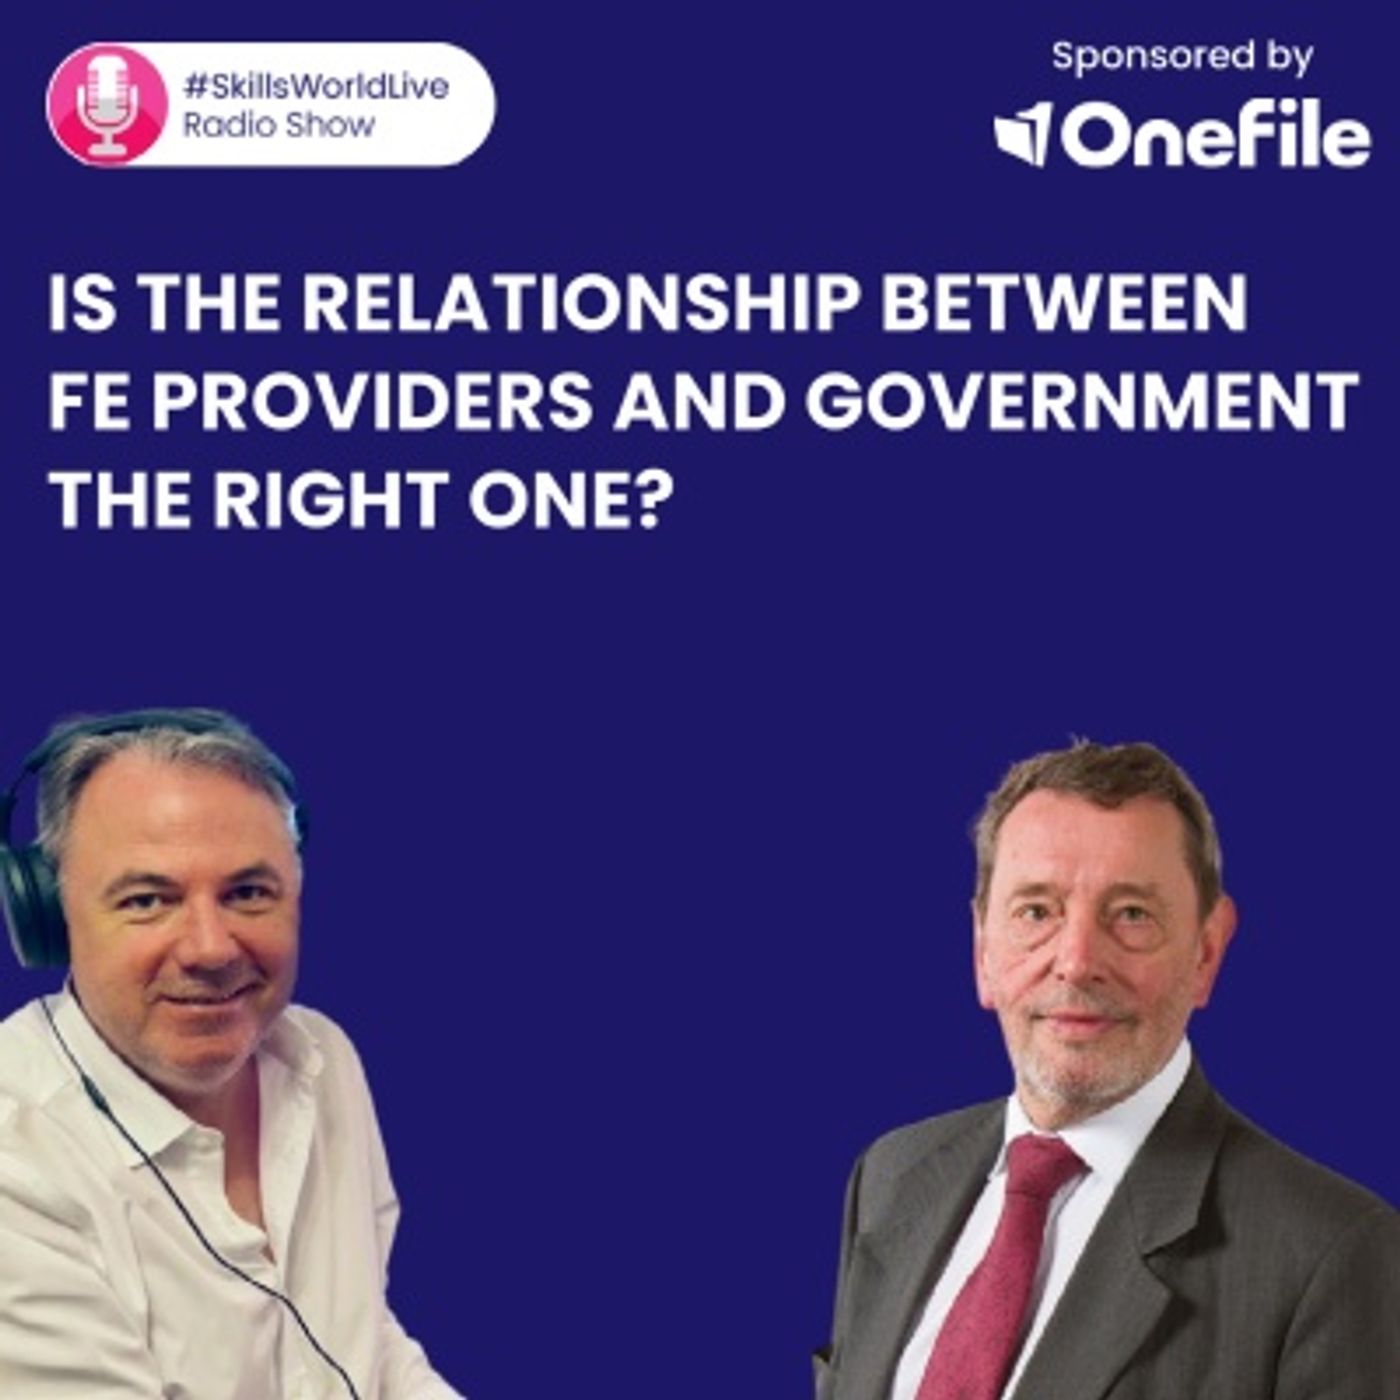 Is the relationship between FE providers and government the right one? #SkillsWorldLive 3.9